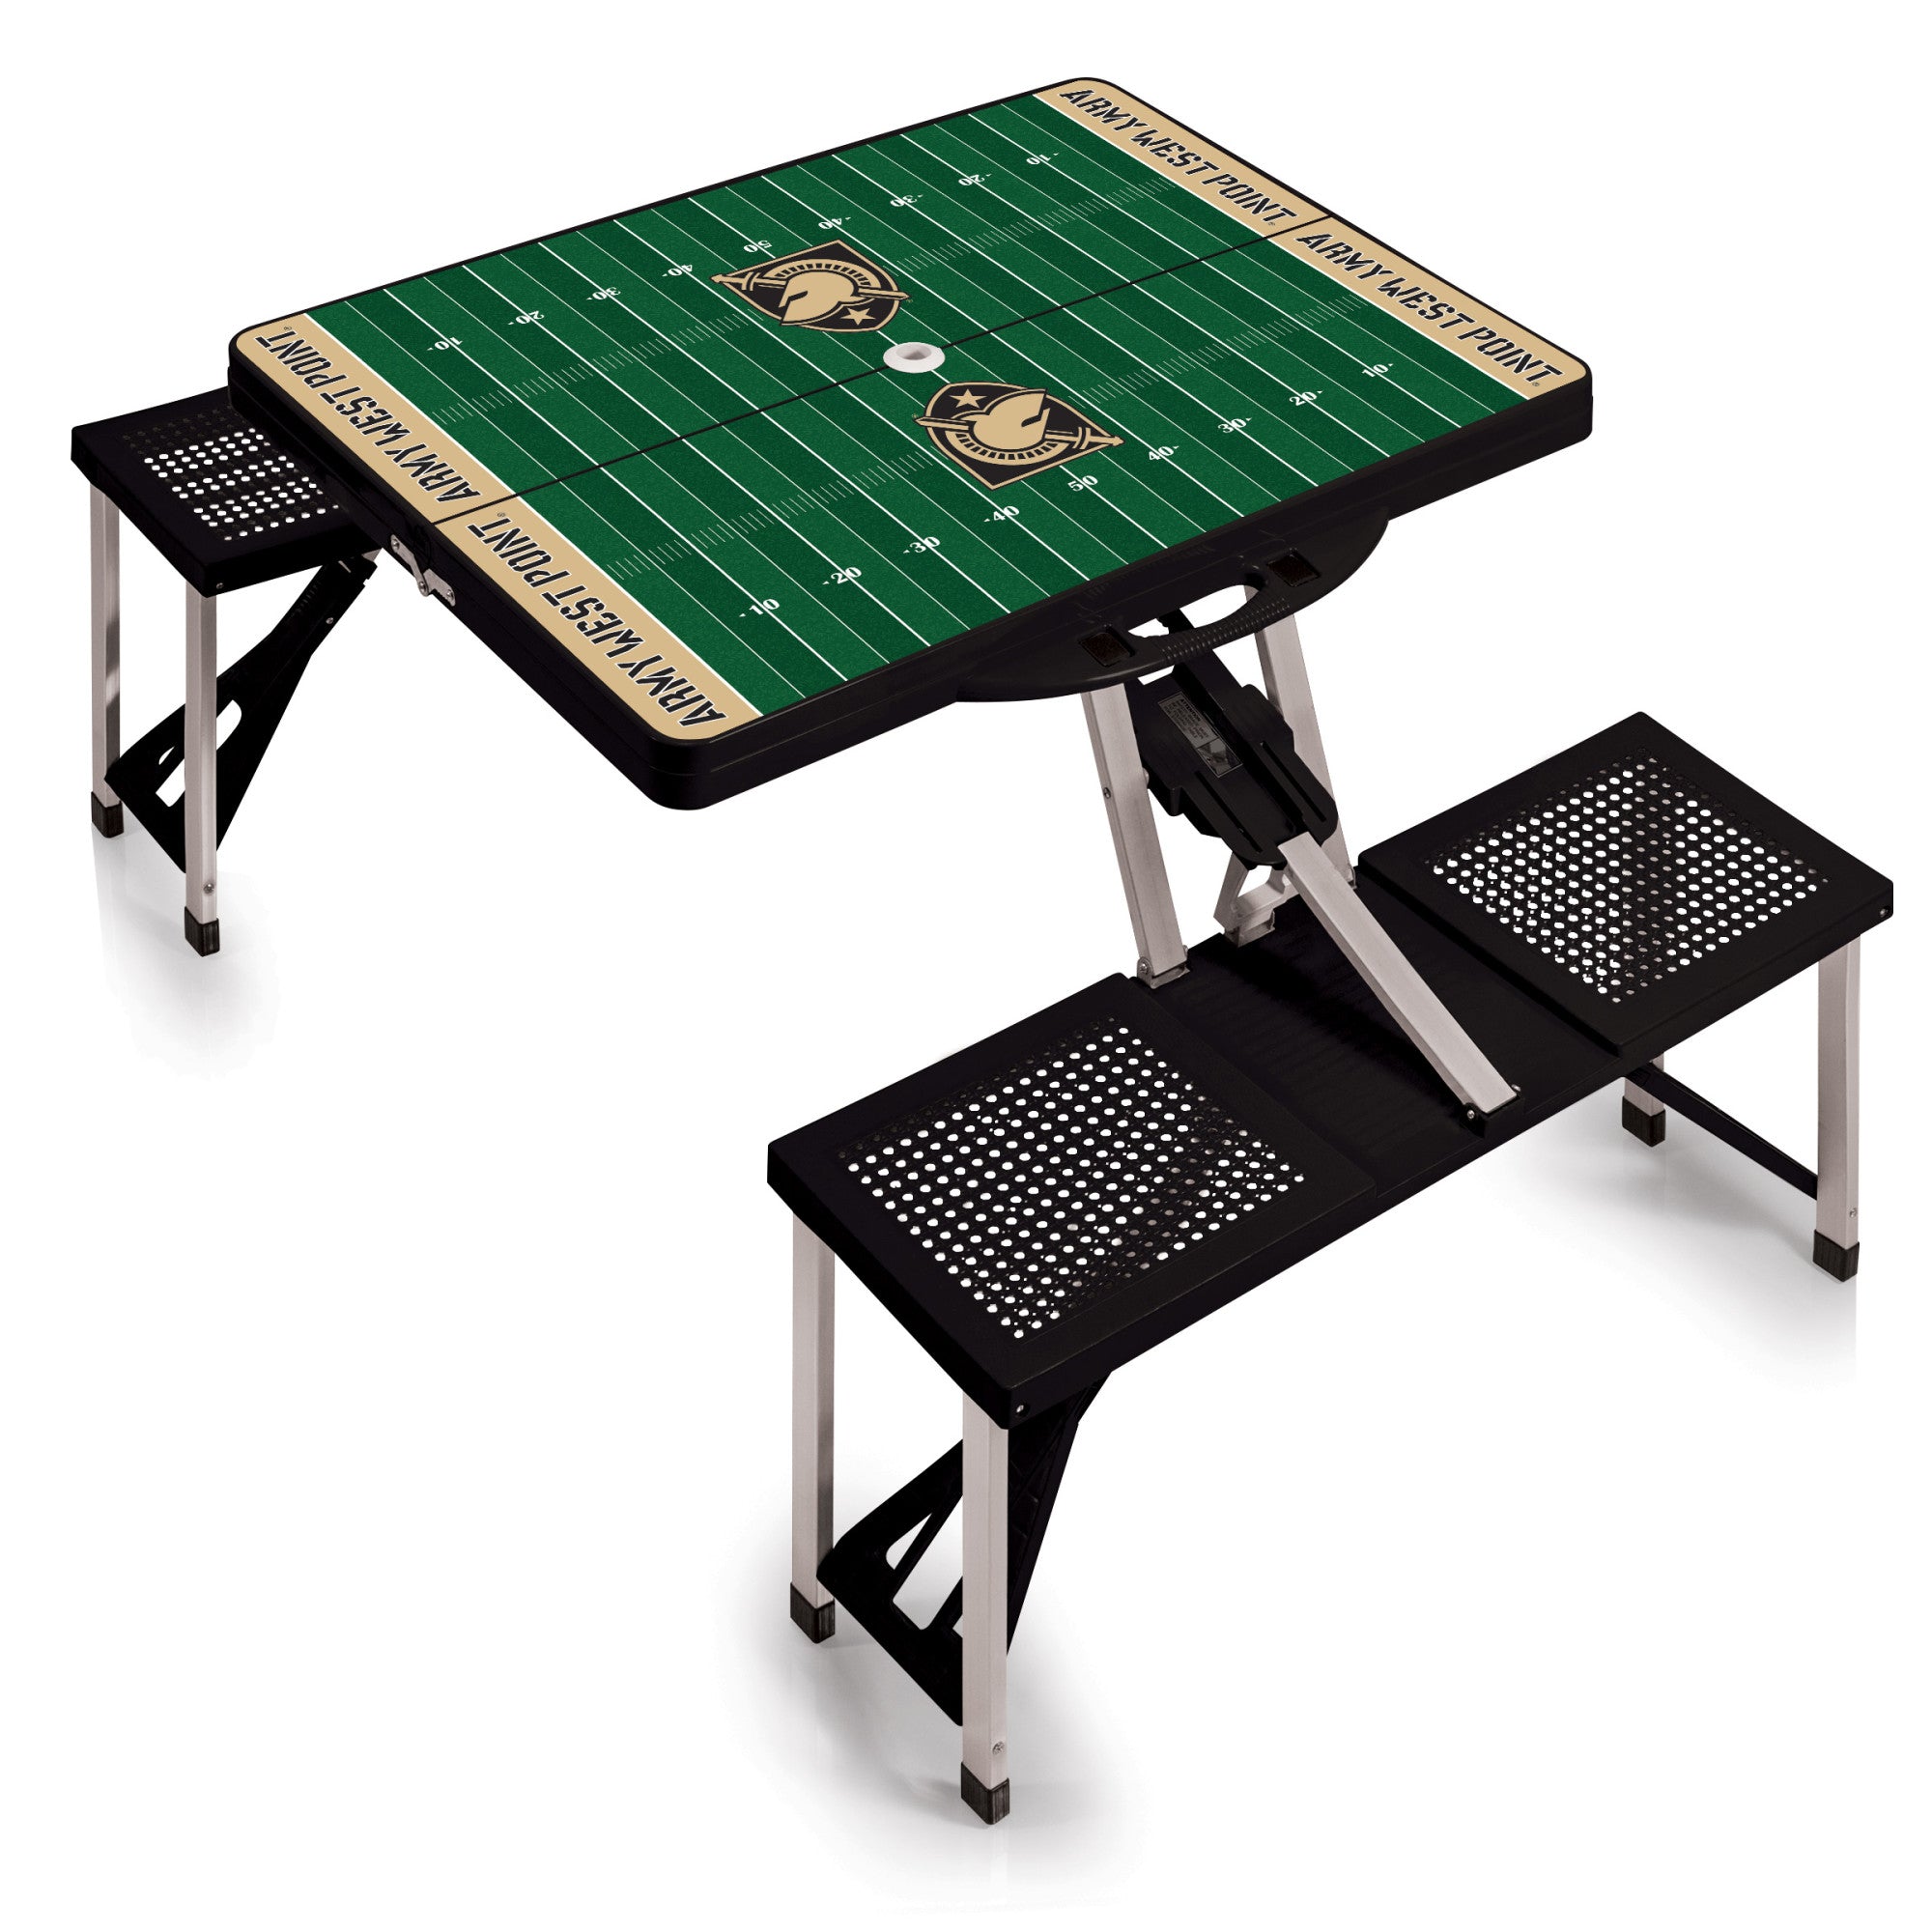 Army Black Knights Football Field - Picnic Table Portable Folding Table with Seats